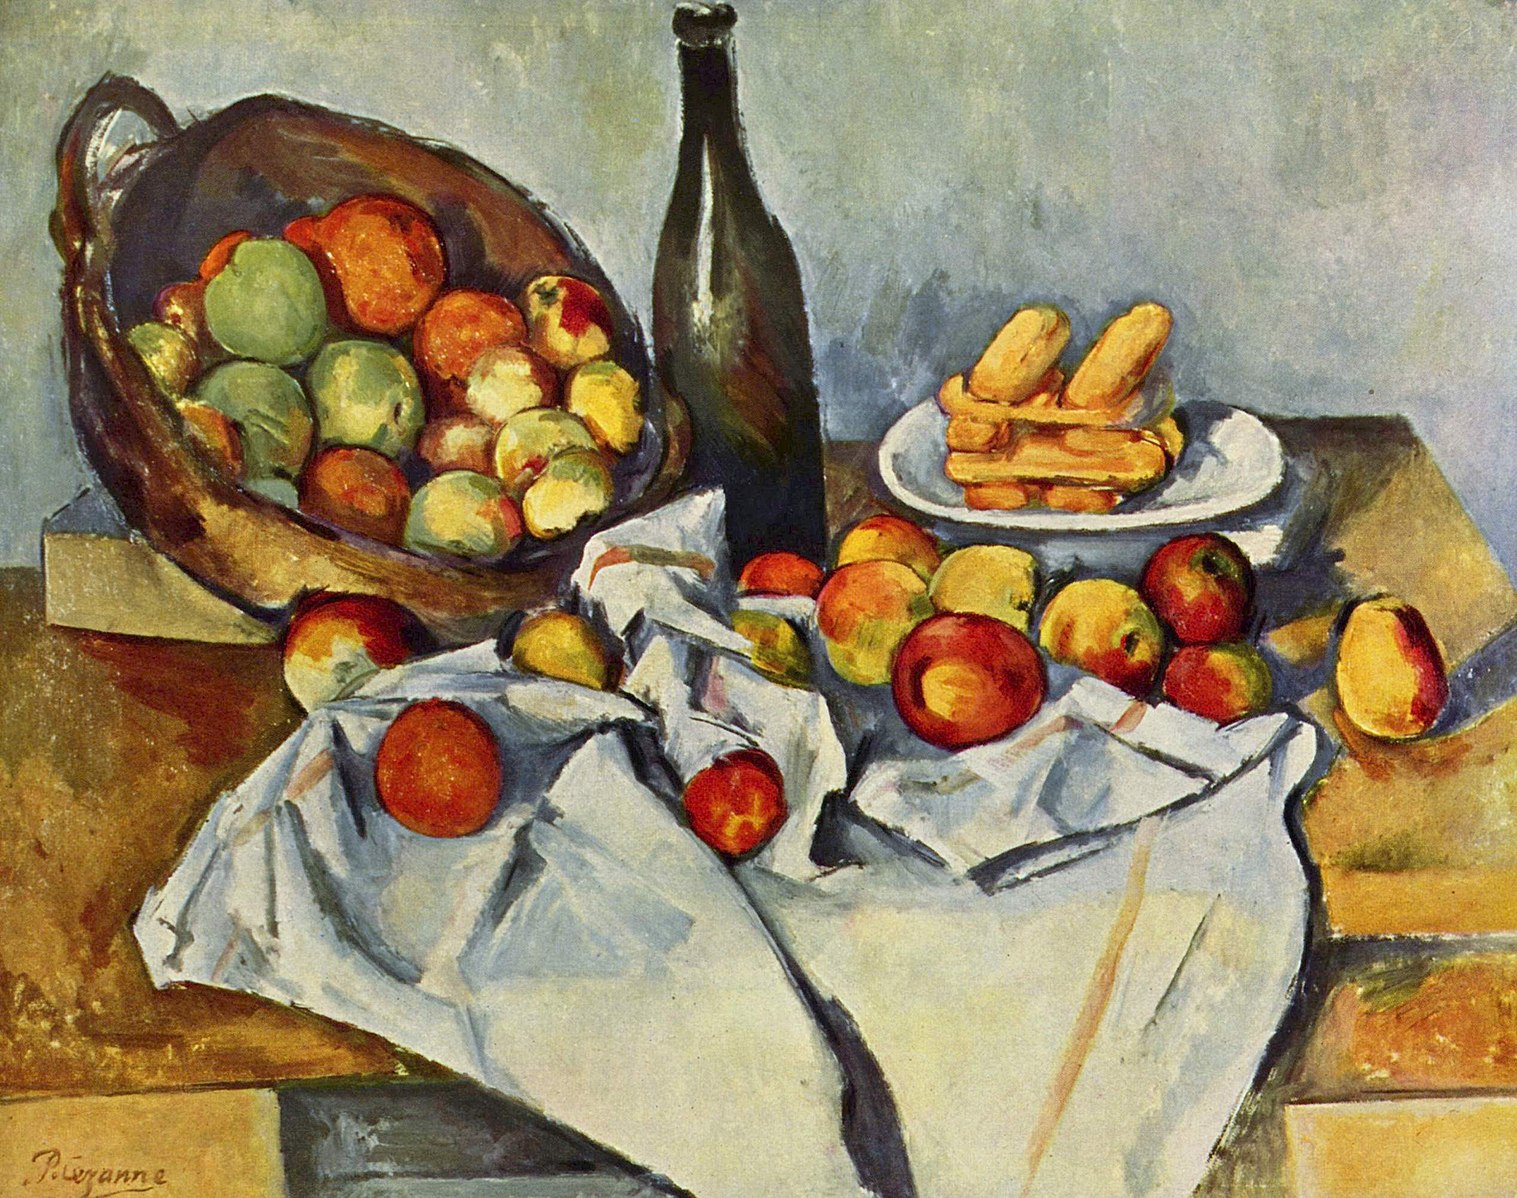 A table with a white draped cloth with a basket of fruit, a wine bottle and a plate of dessert